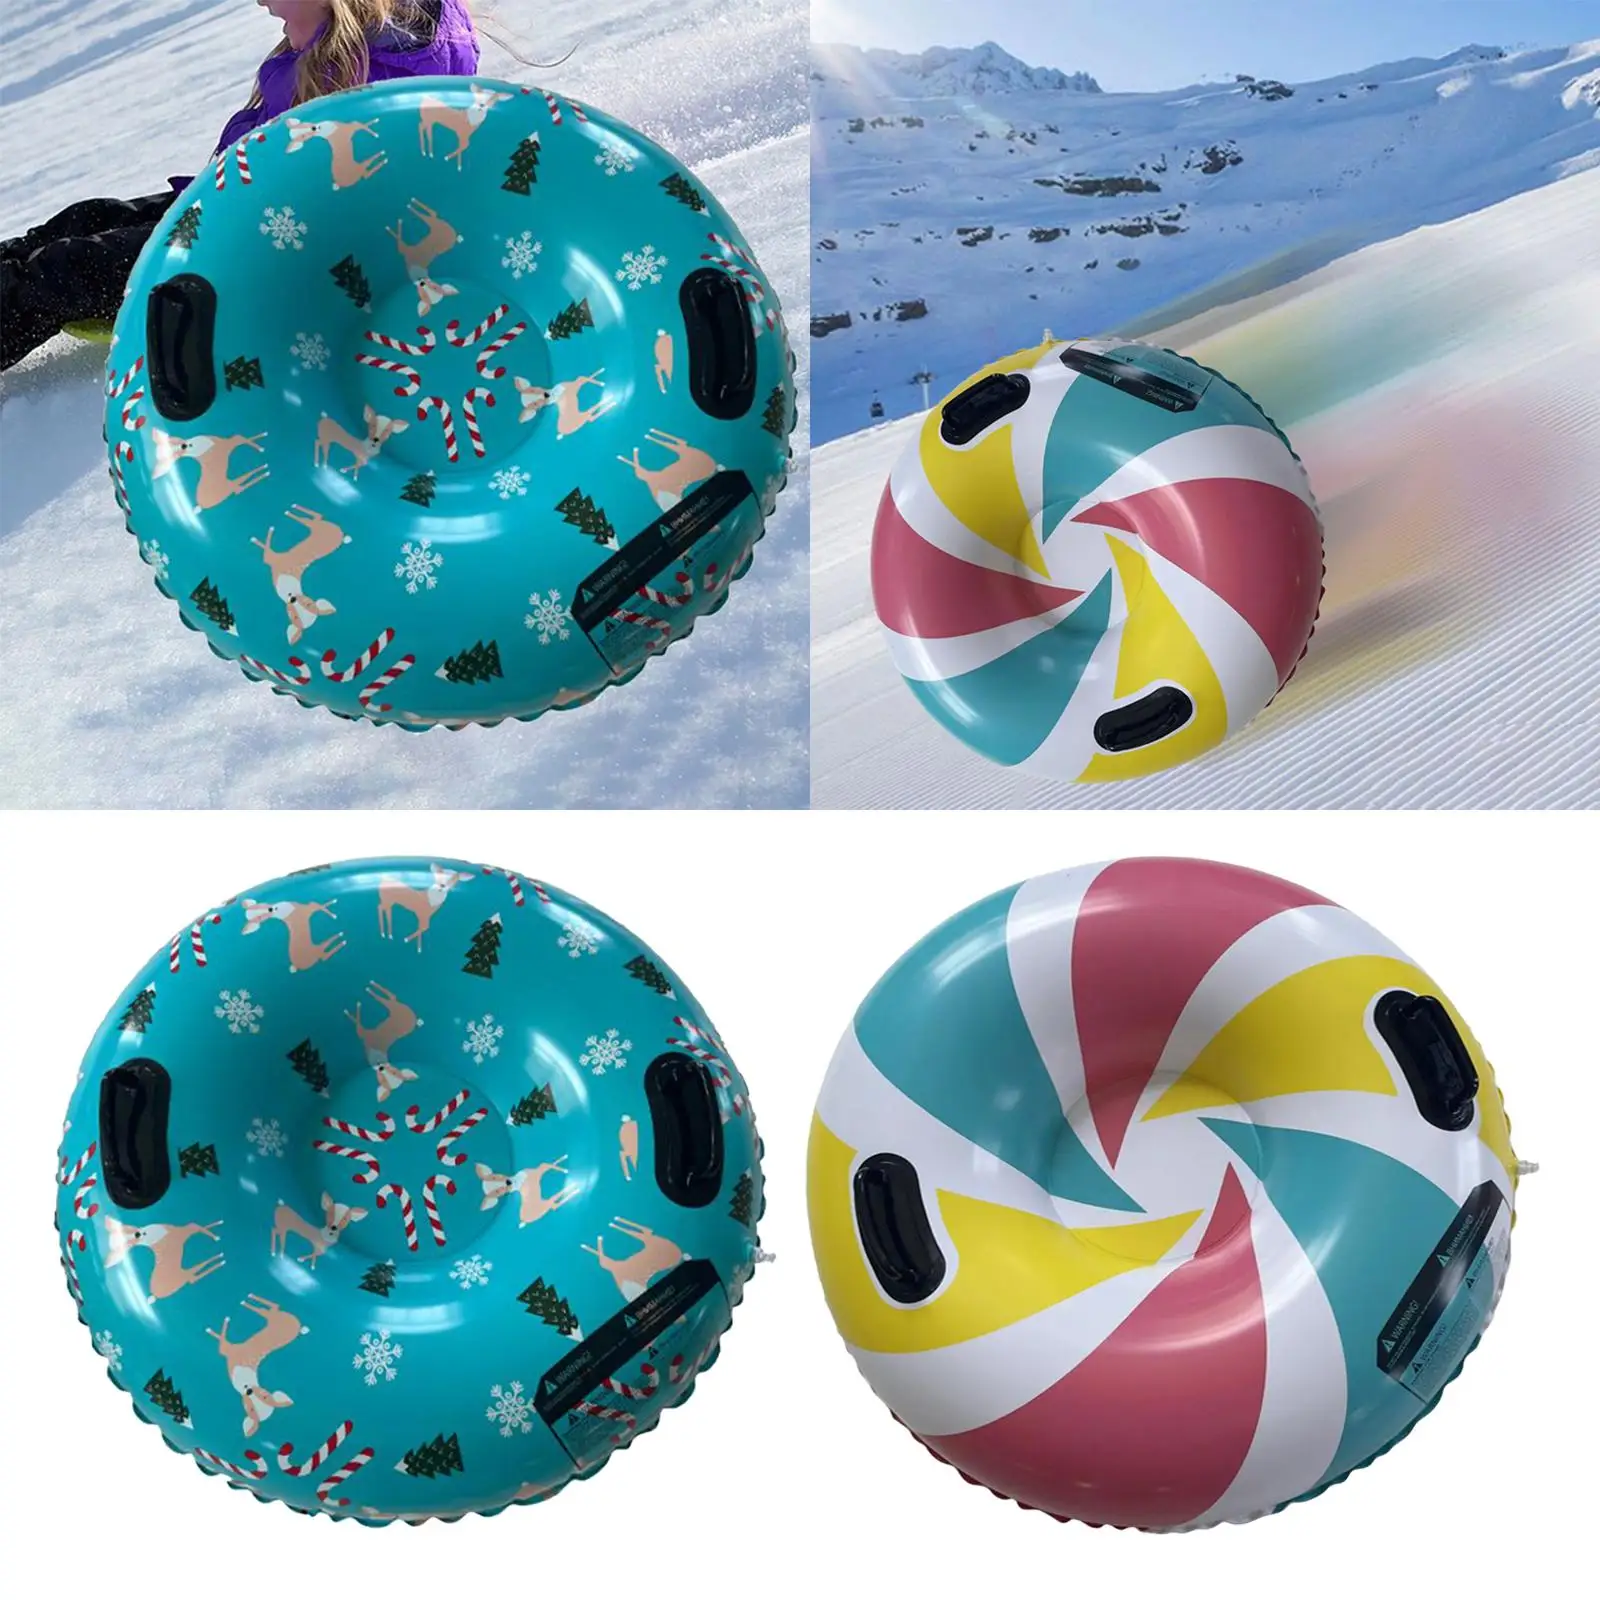 lovehousesky Heavy Duty Winter Snow Tube with Handle Easy to Carry Sports